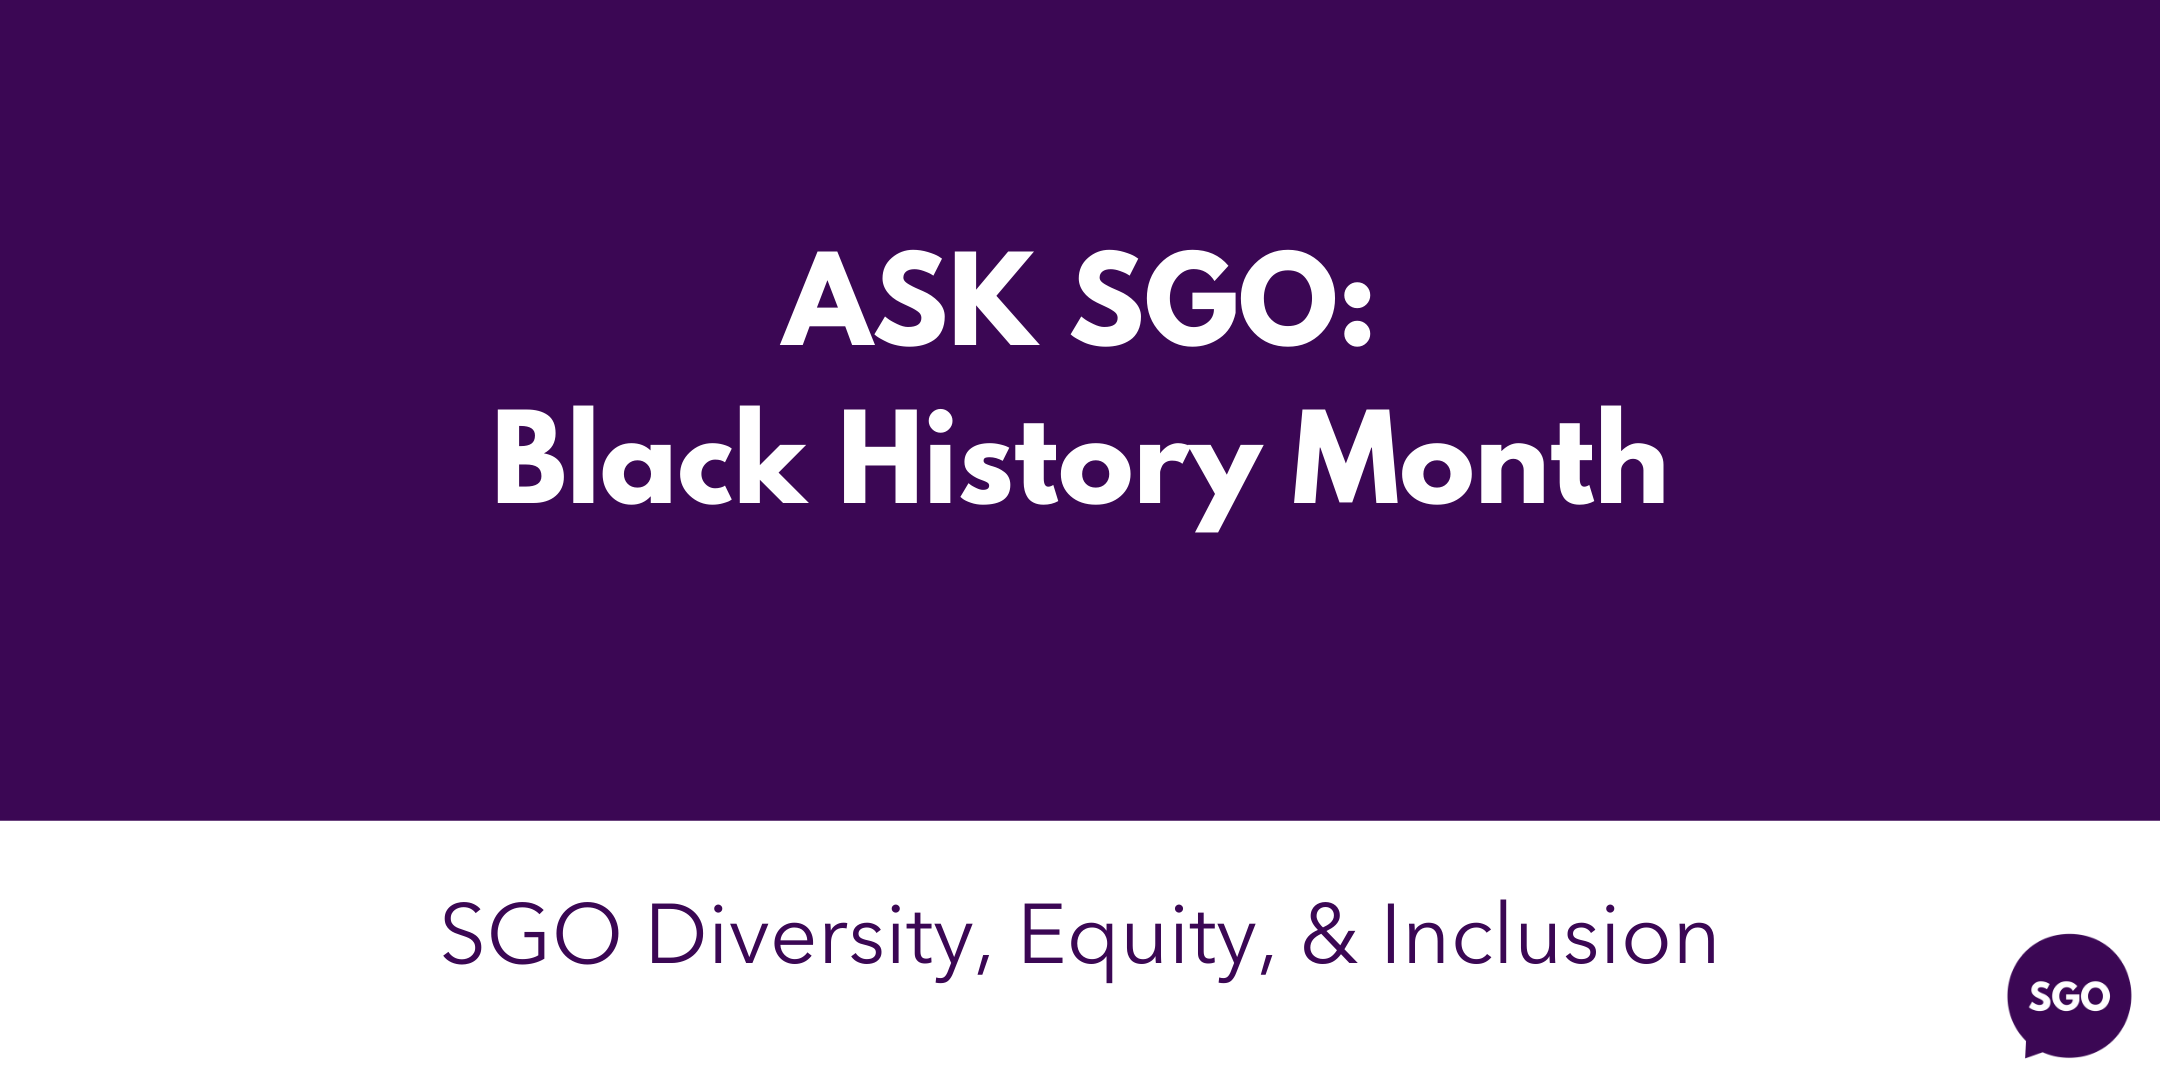 Featured image for “Ask SGO: Black History Month”